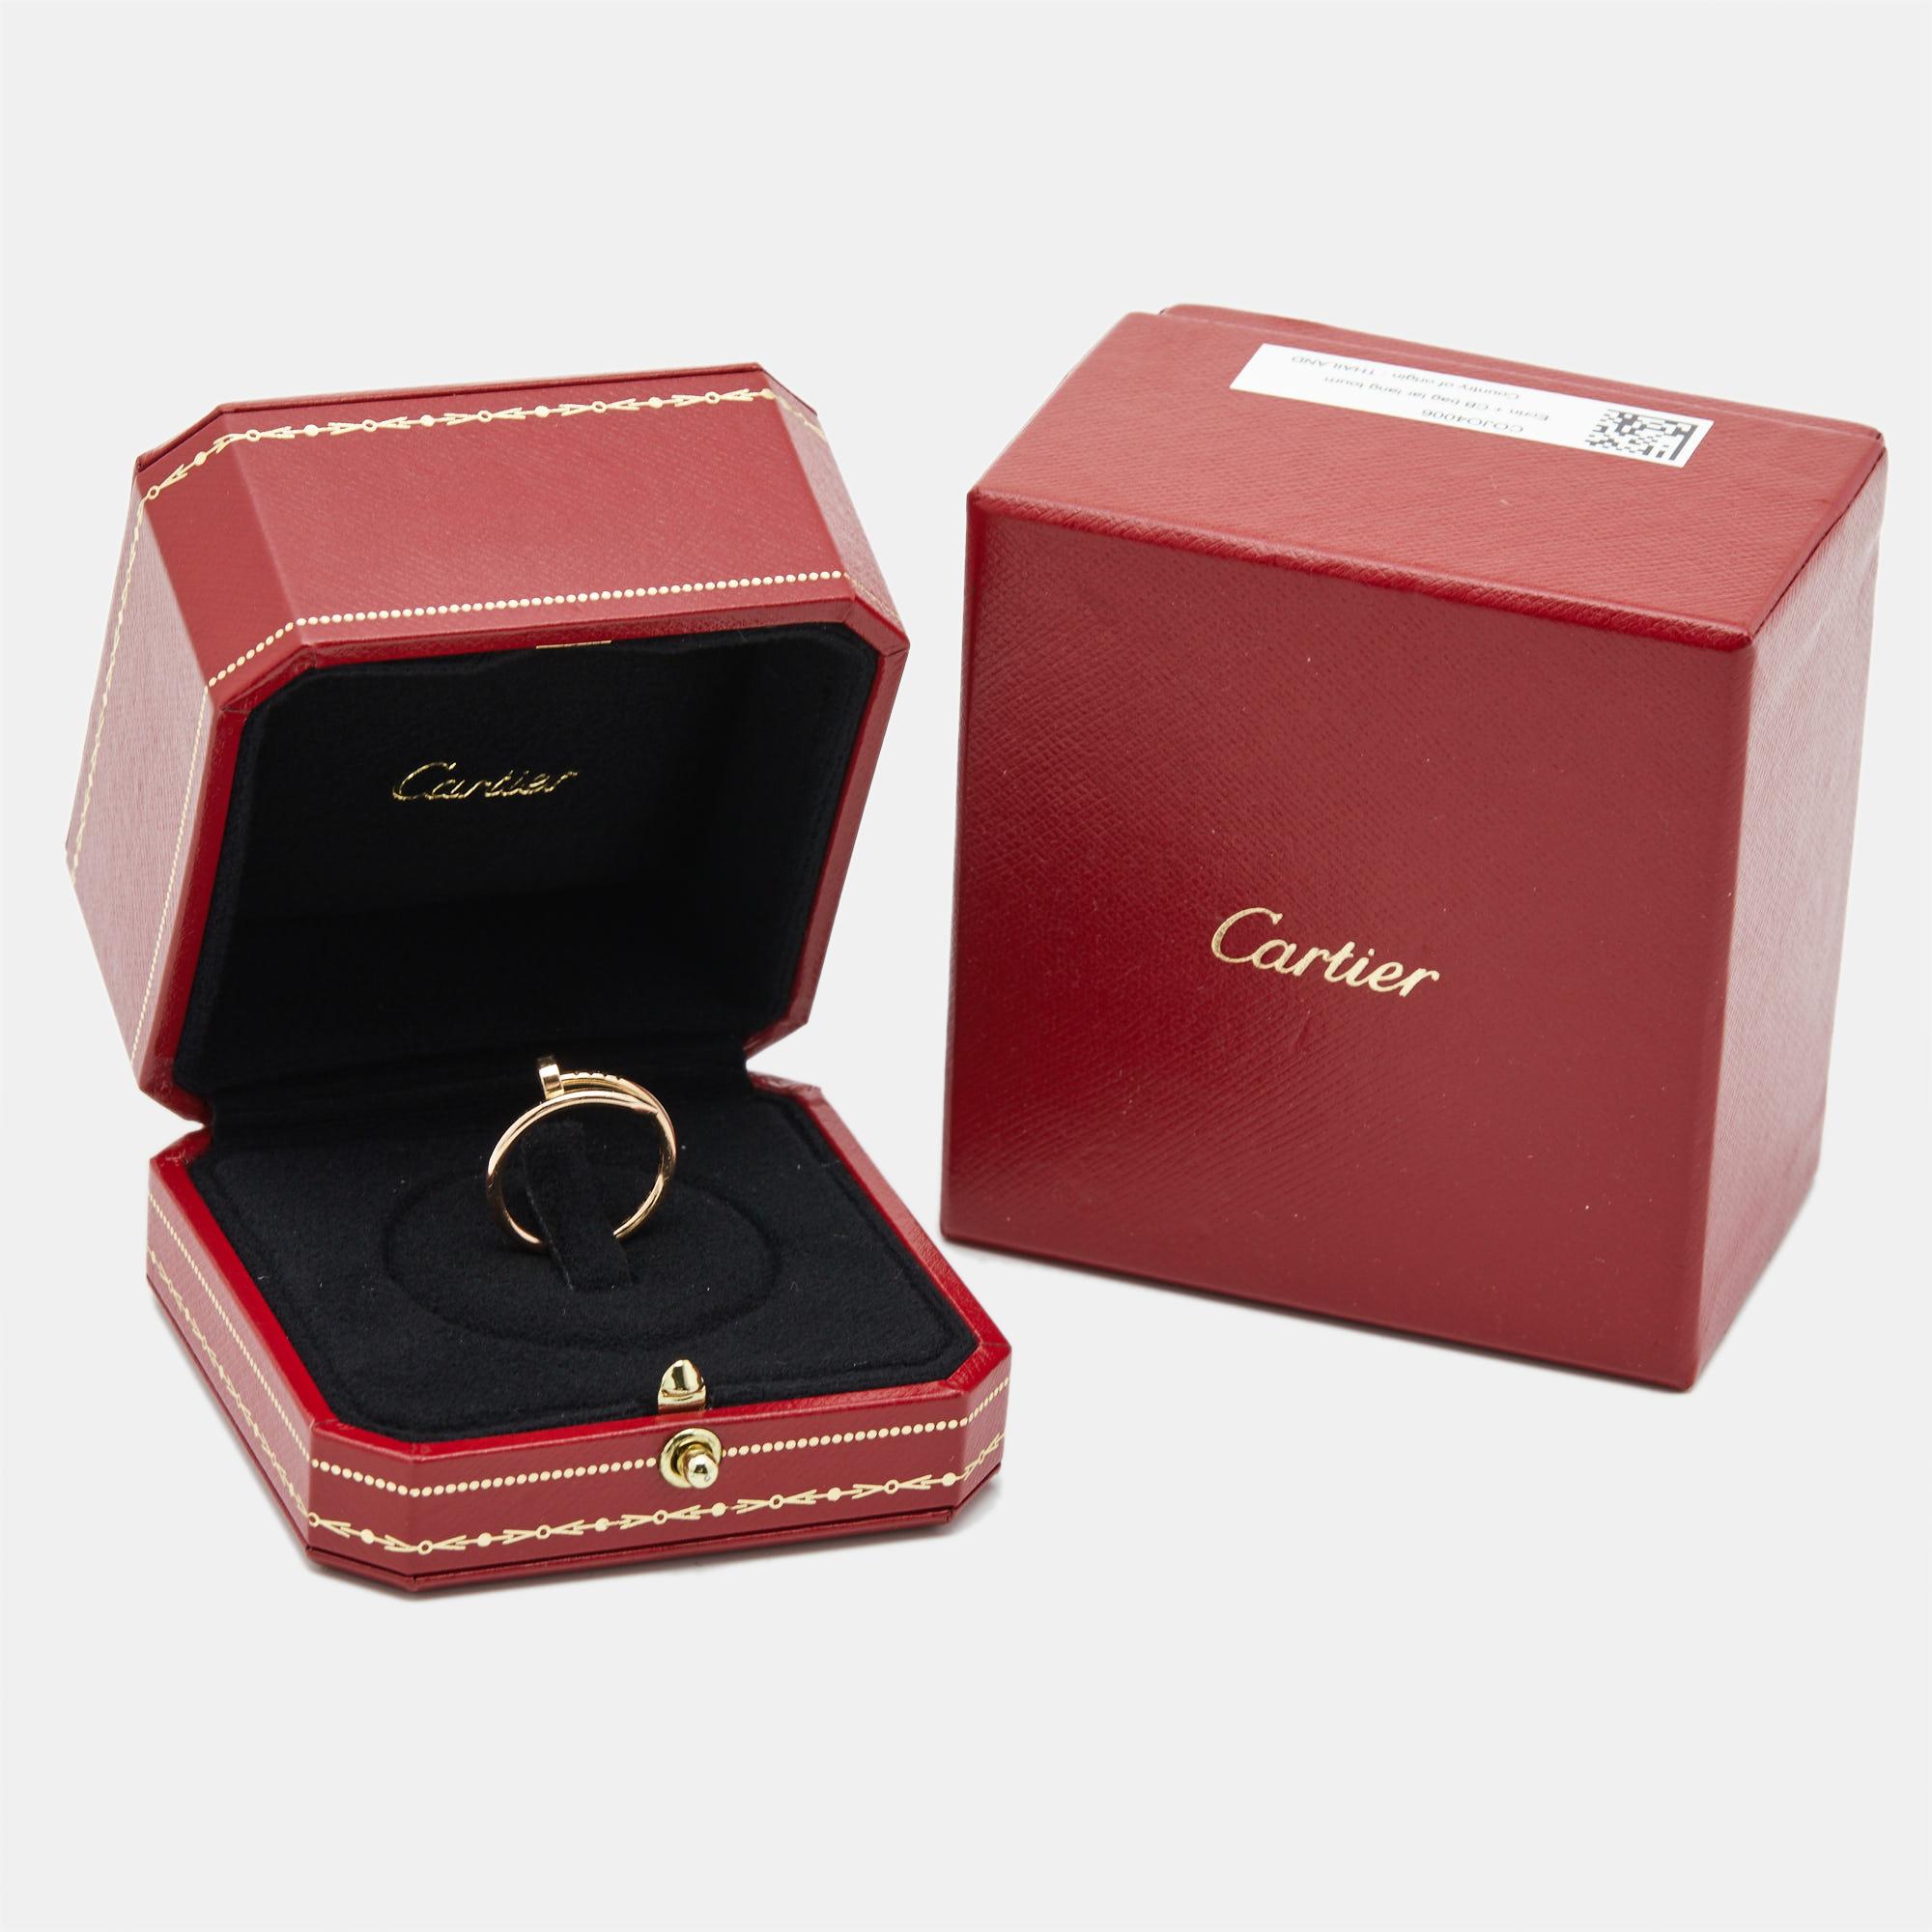 Cartier Juste Un Clou 18k Rose Gold Small Model Ring Size 52 3